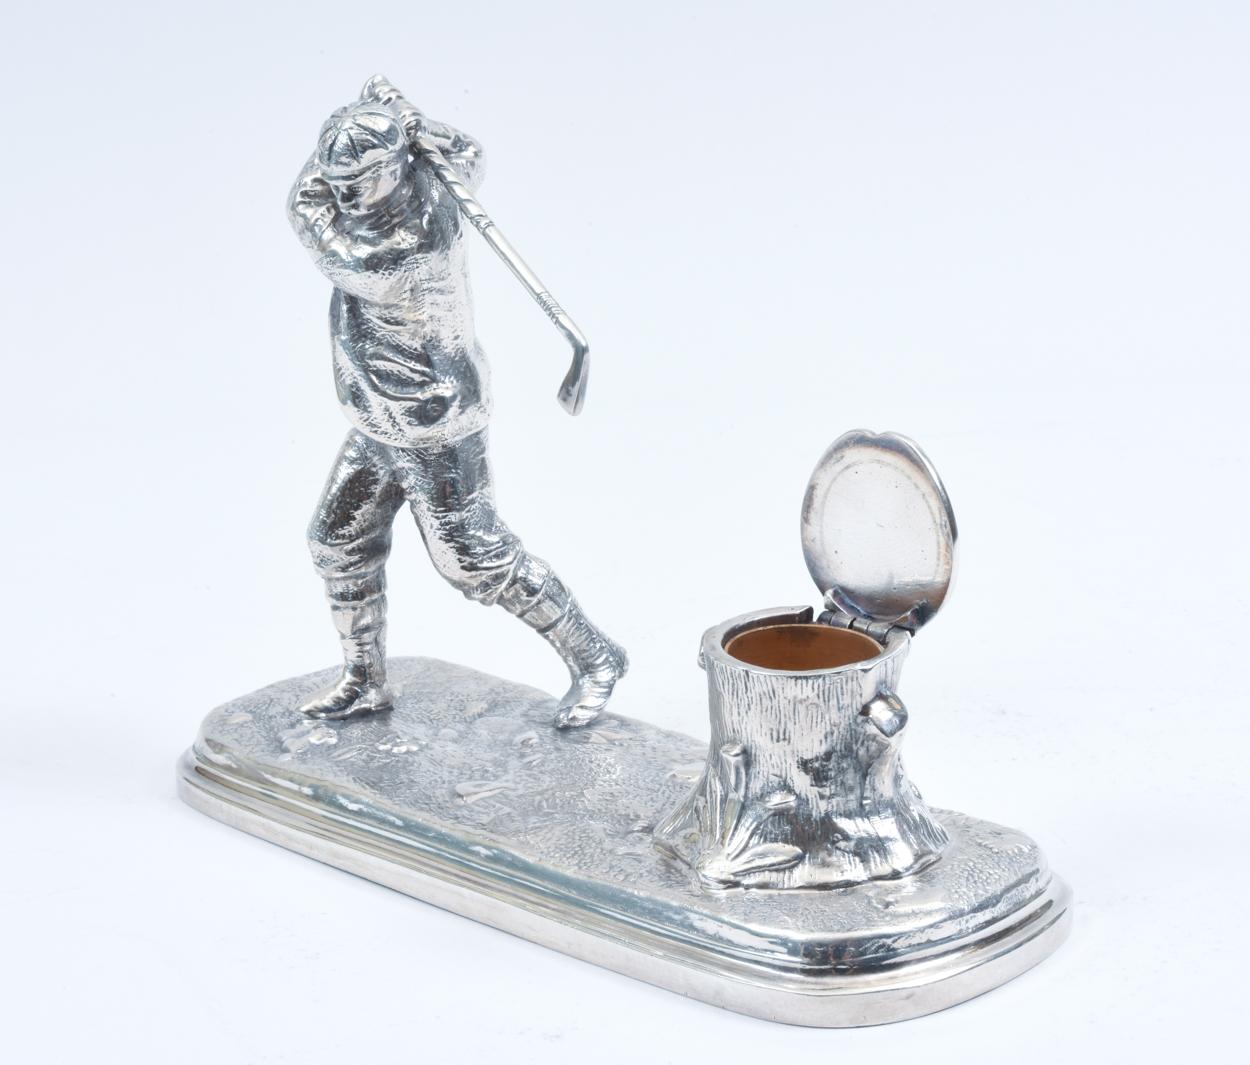 Silver Plate English Sheffield Plated Inkwell or Golfer Design Details